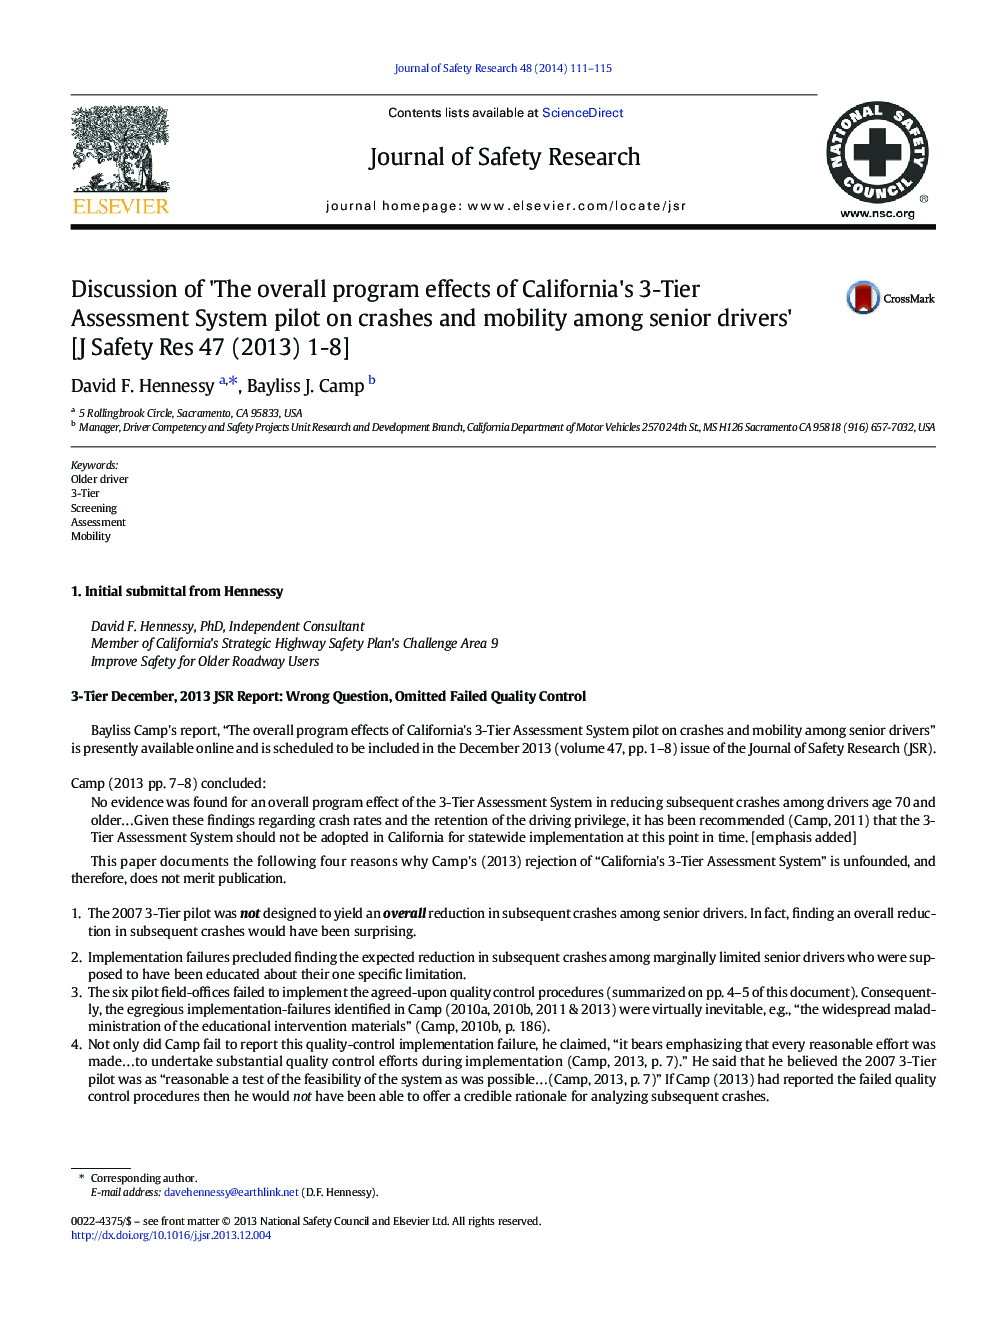 Discussion of 'The overall program effects of California's 3-Tier Assessment System pilot on crashes and mobility among senior drivers' [J Safety Res 47 (2013) 1-8]